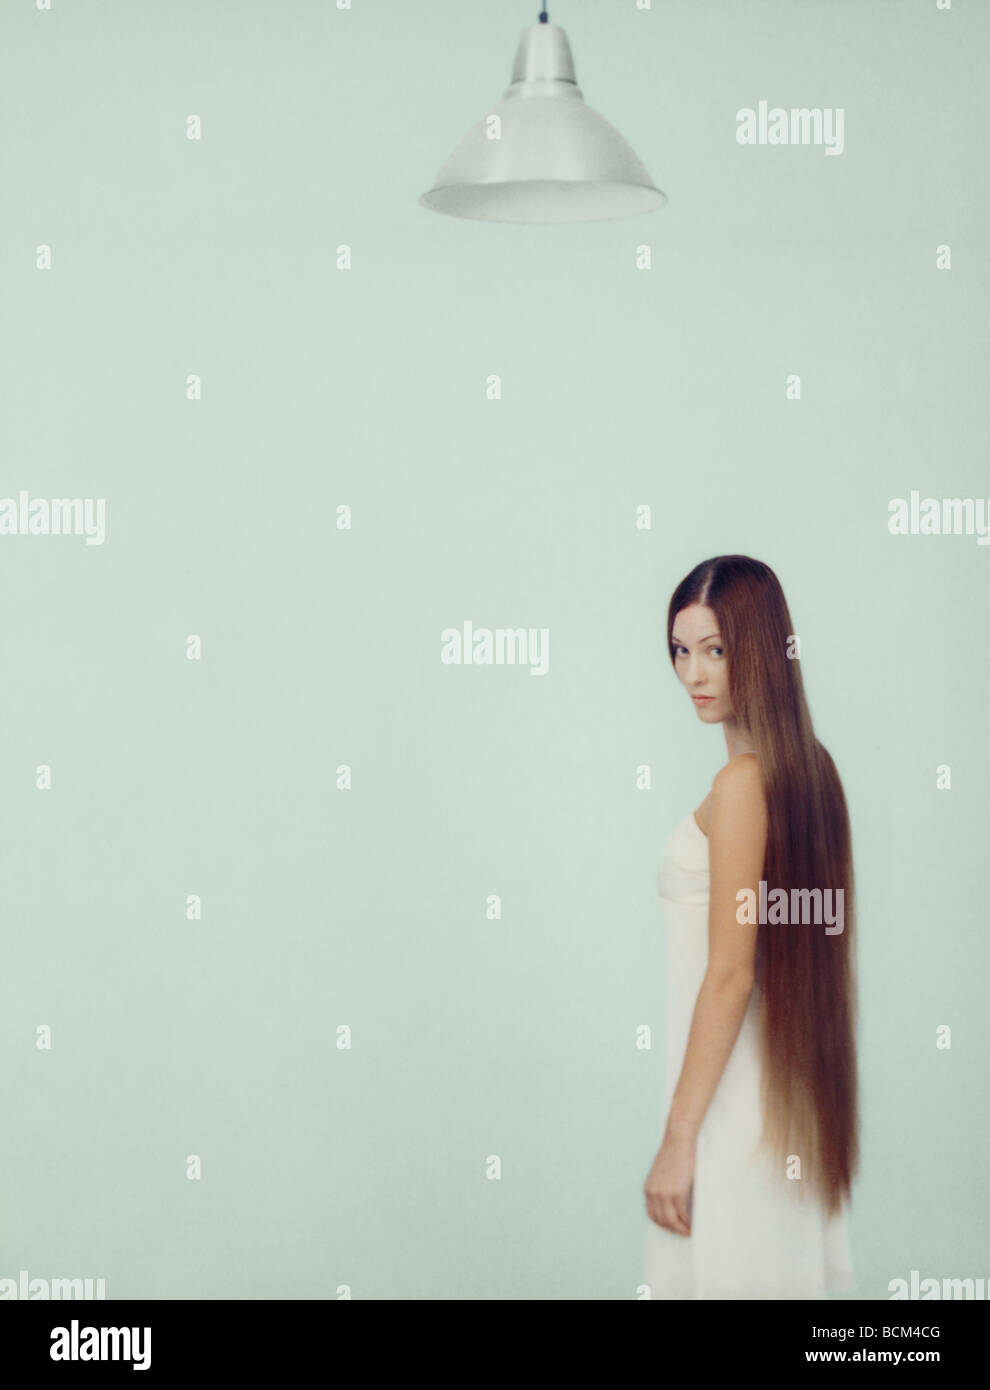 Young woman with long hair, looking over shoulder at camera Stock Photo